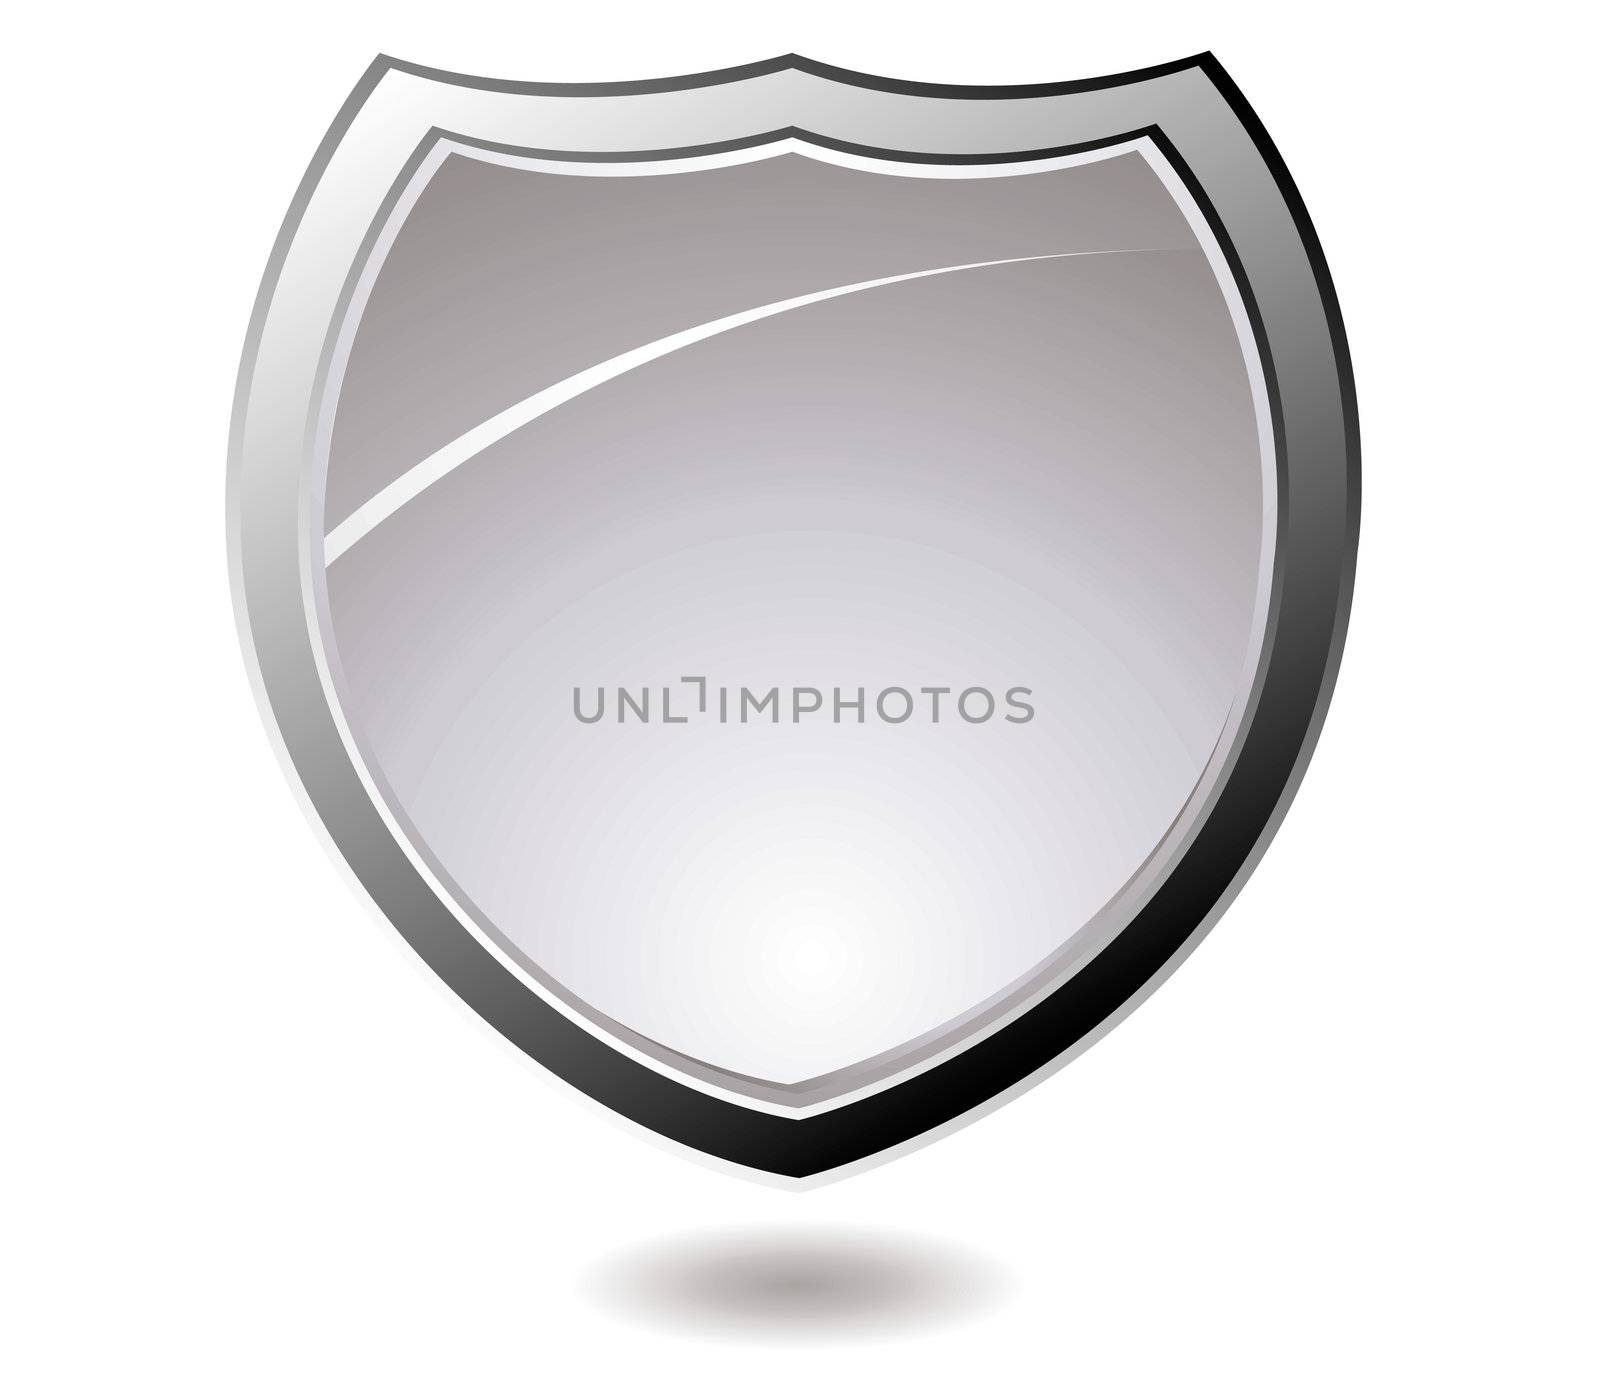 Modern shield design with drop shadow and a silver bevel